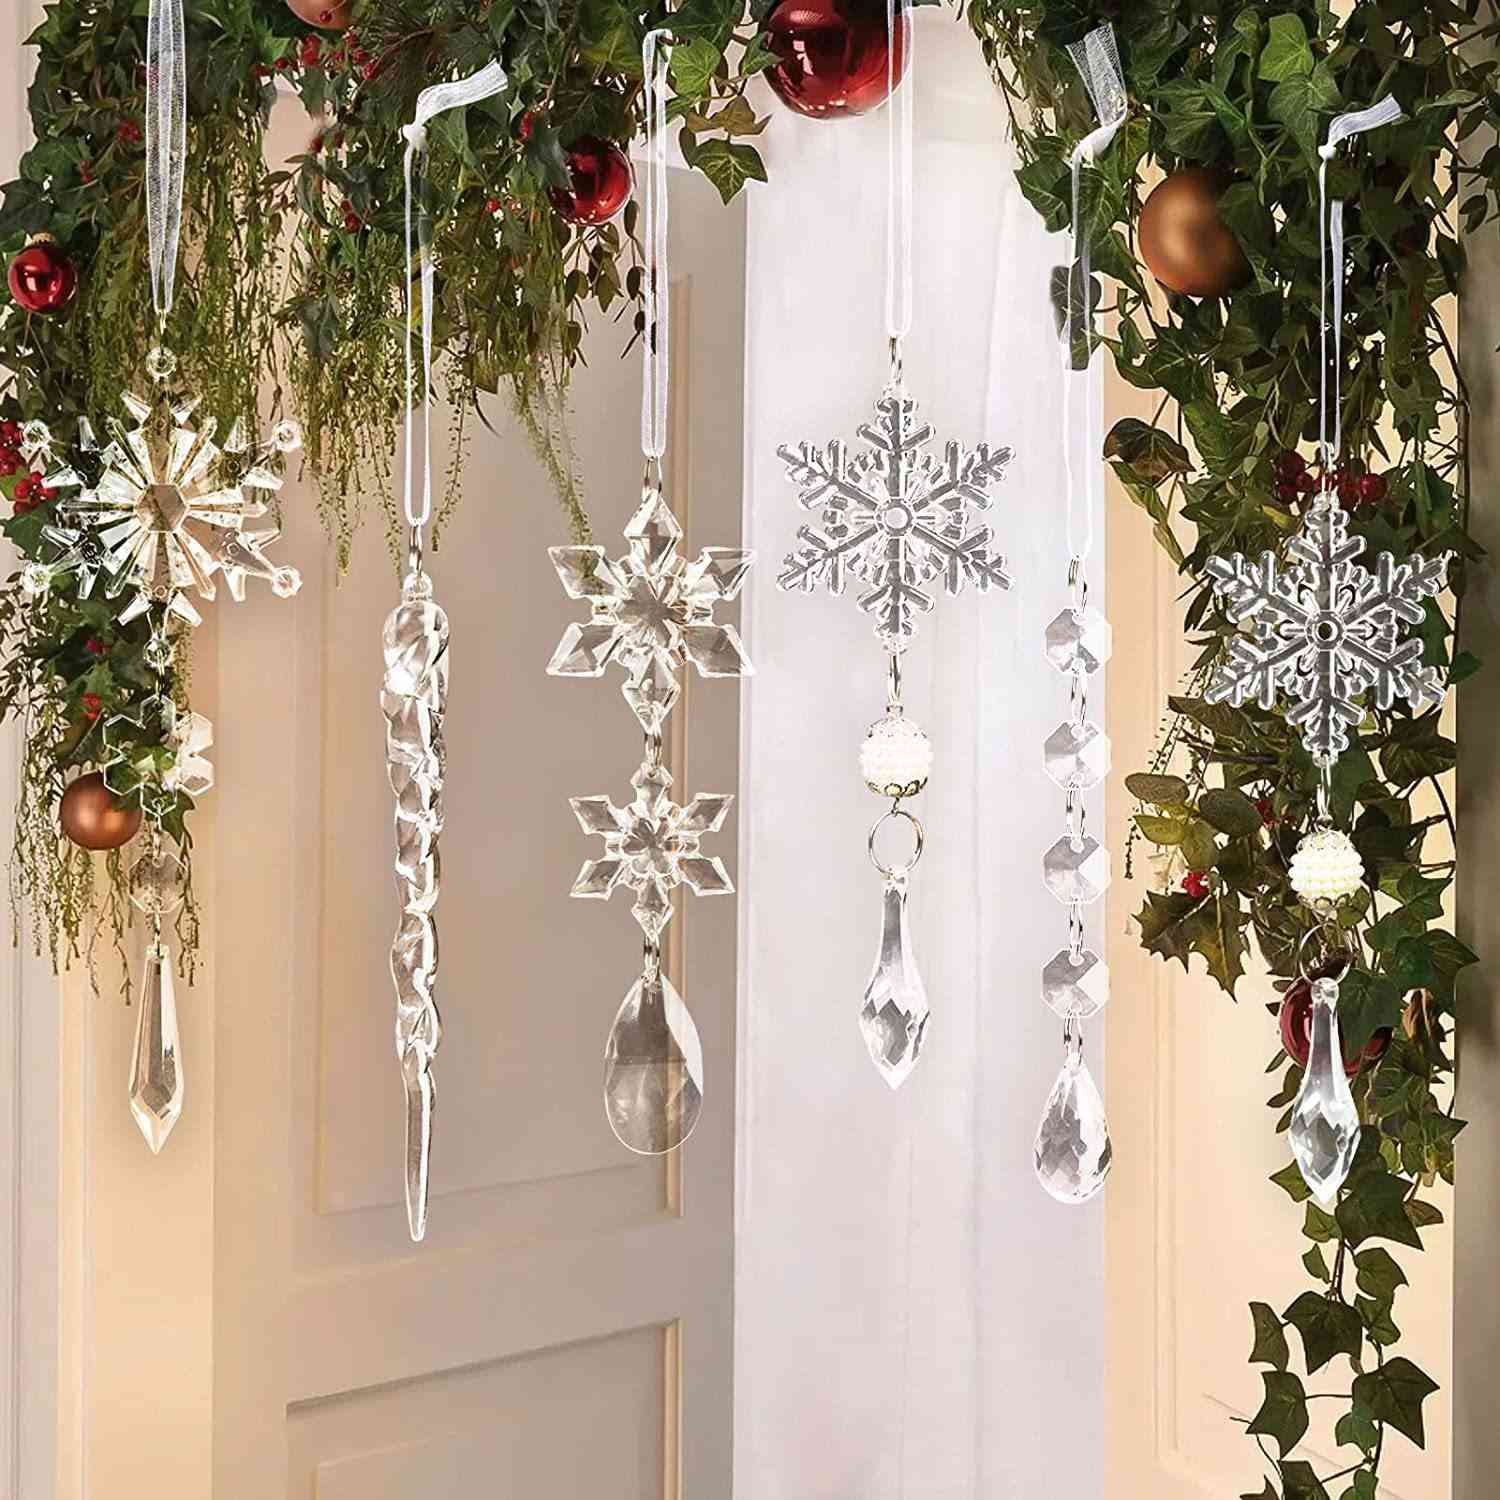 10-Piece Acrylic Icicle Ornaments